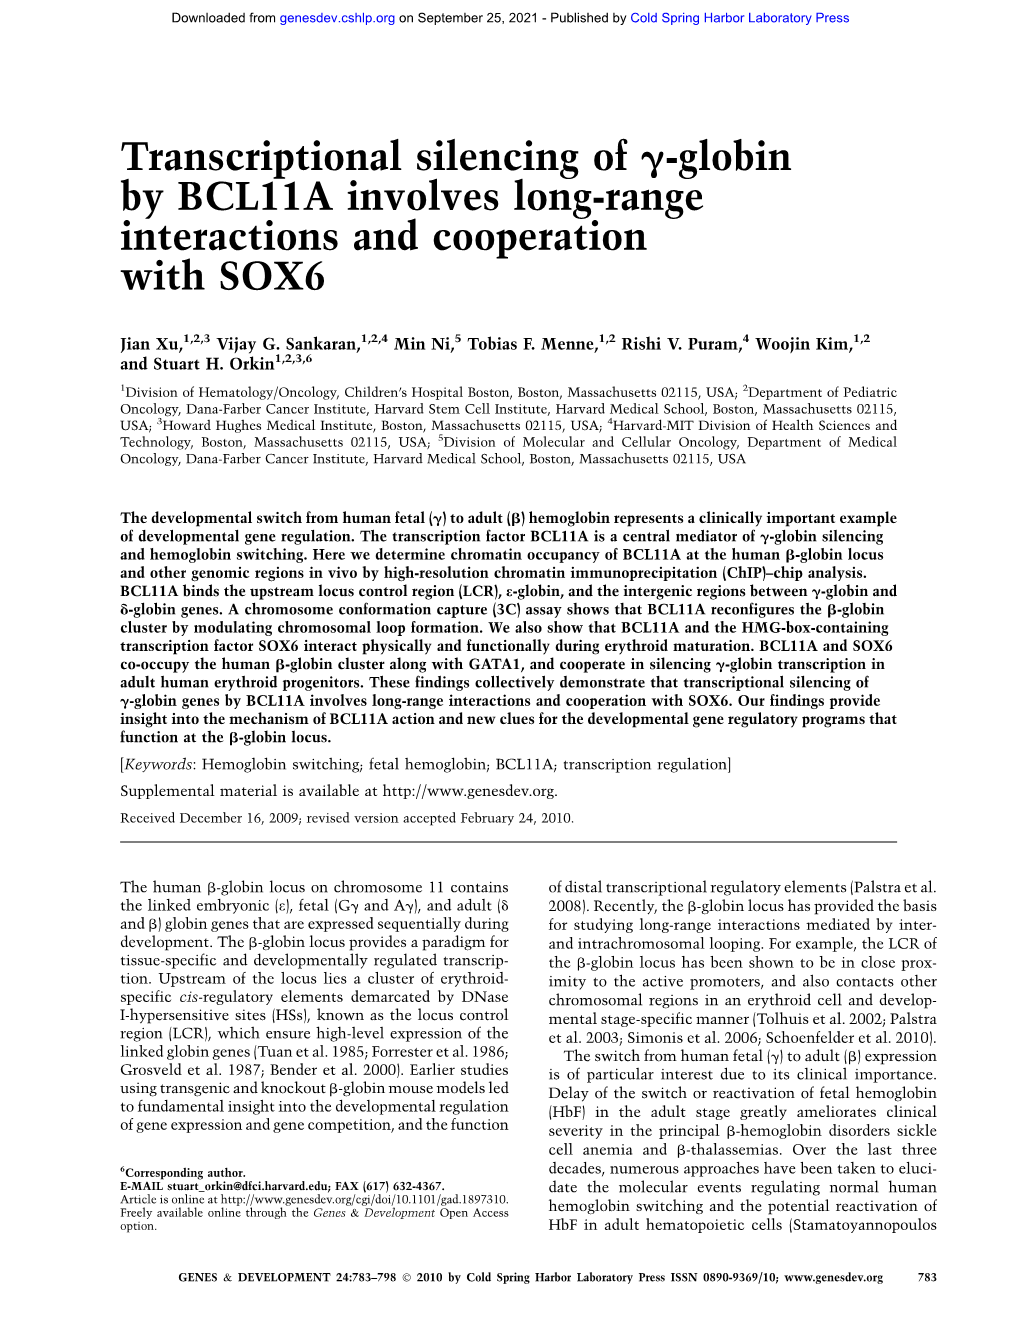 Transcriptional Silencing of G-Globin by BCL11A Involves Long-Range Interactions and Cooperation with SOX6